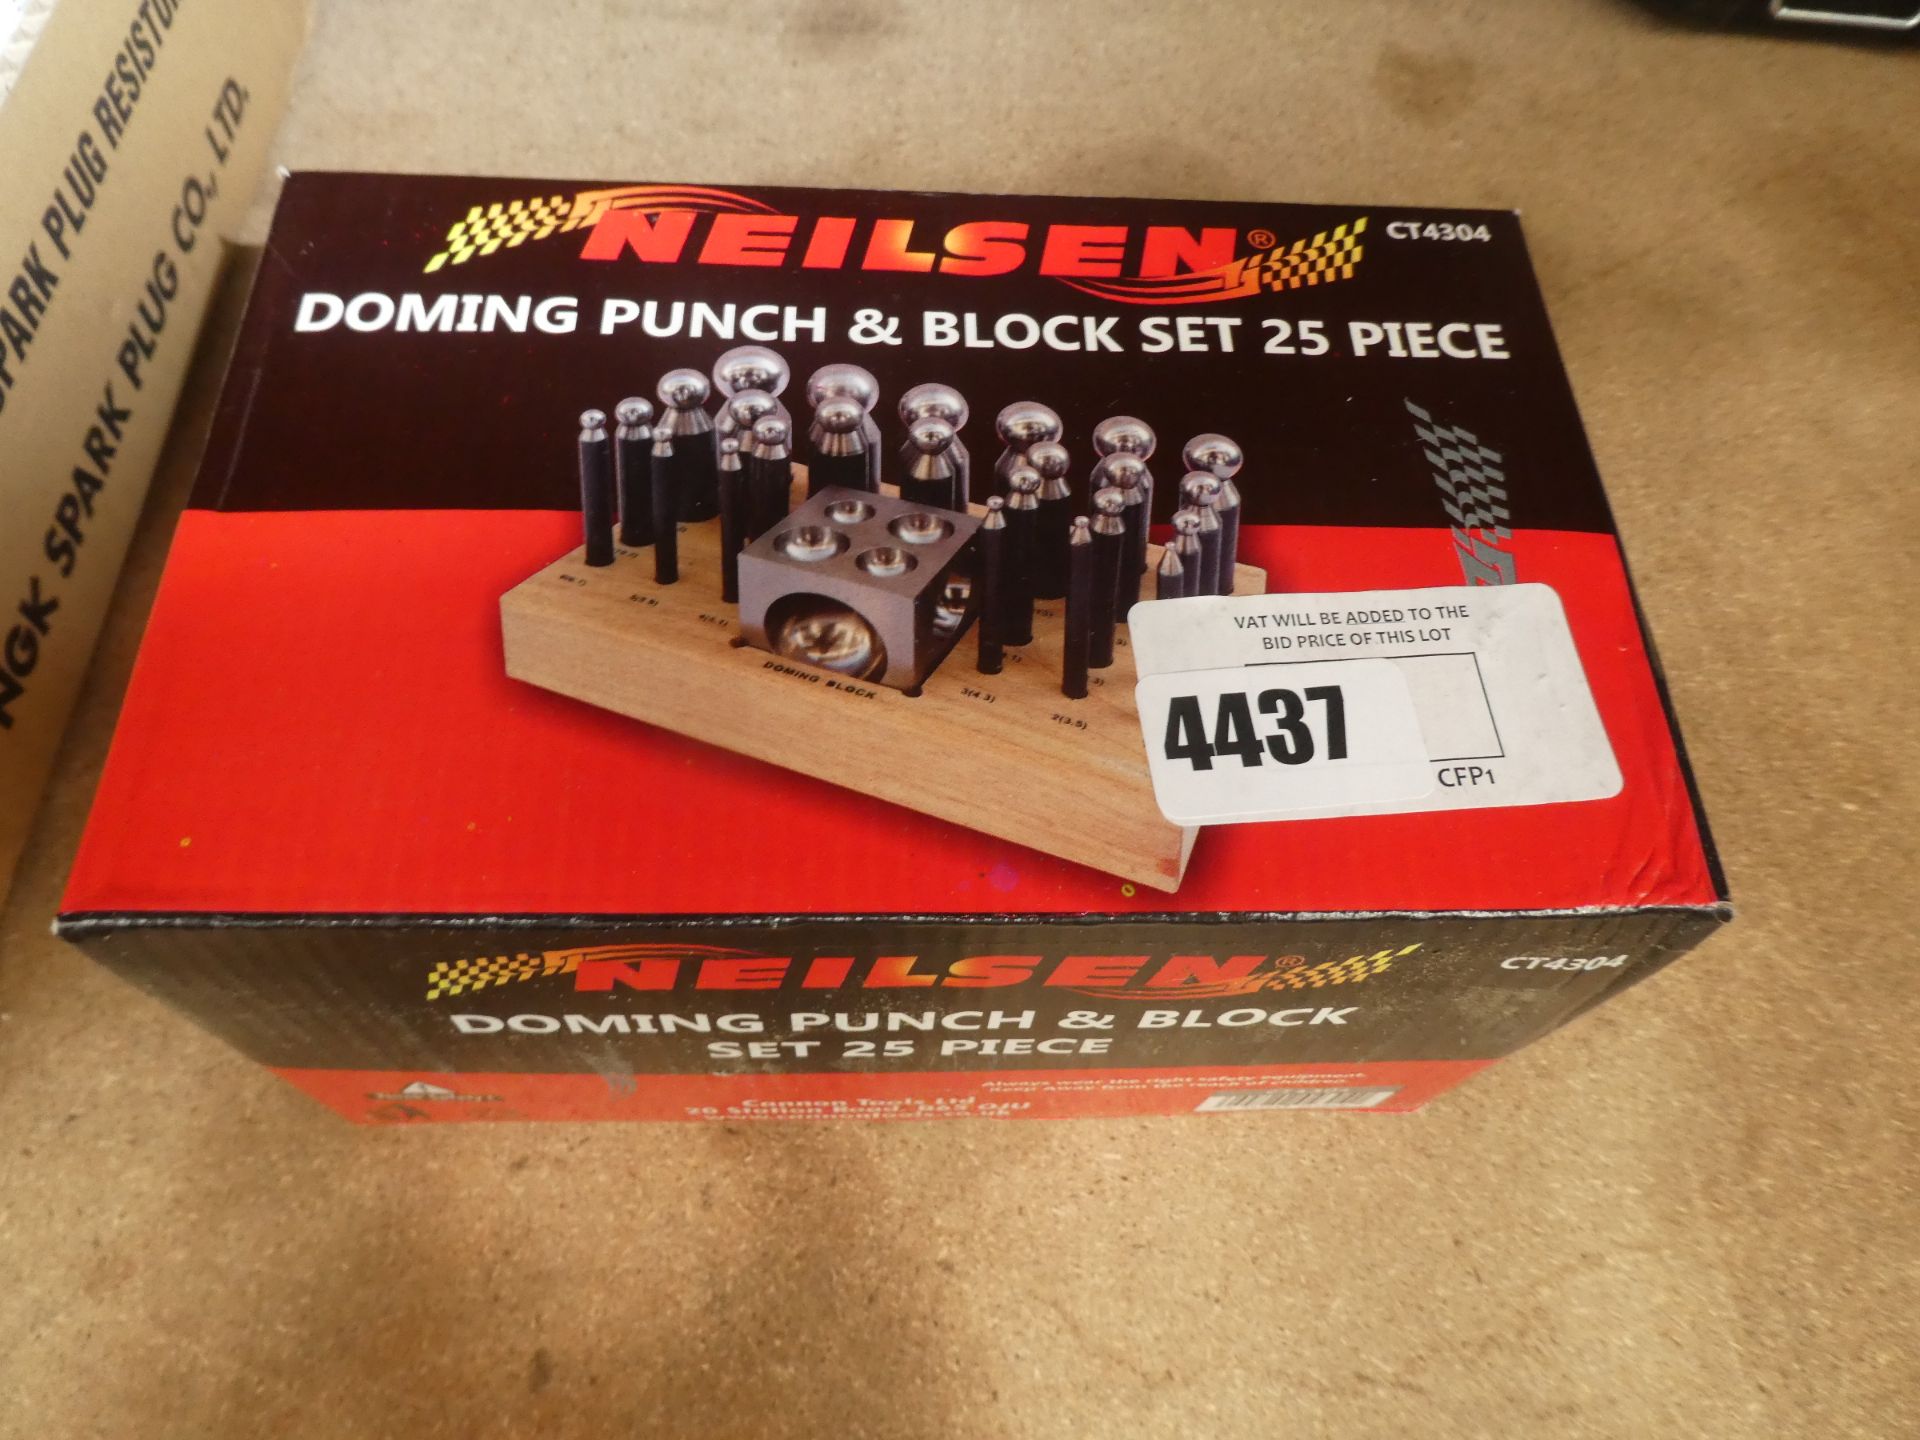 Neilsen doming punch and block set